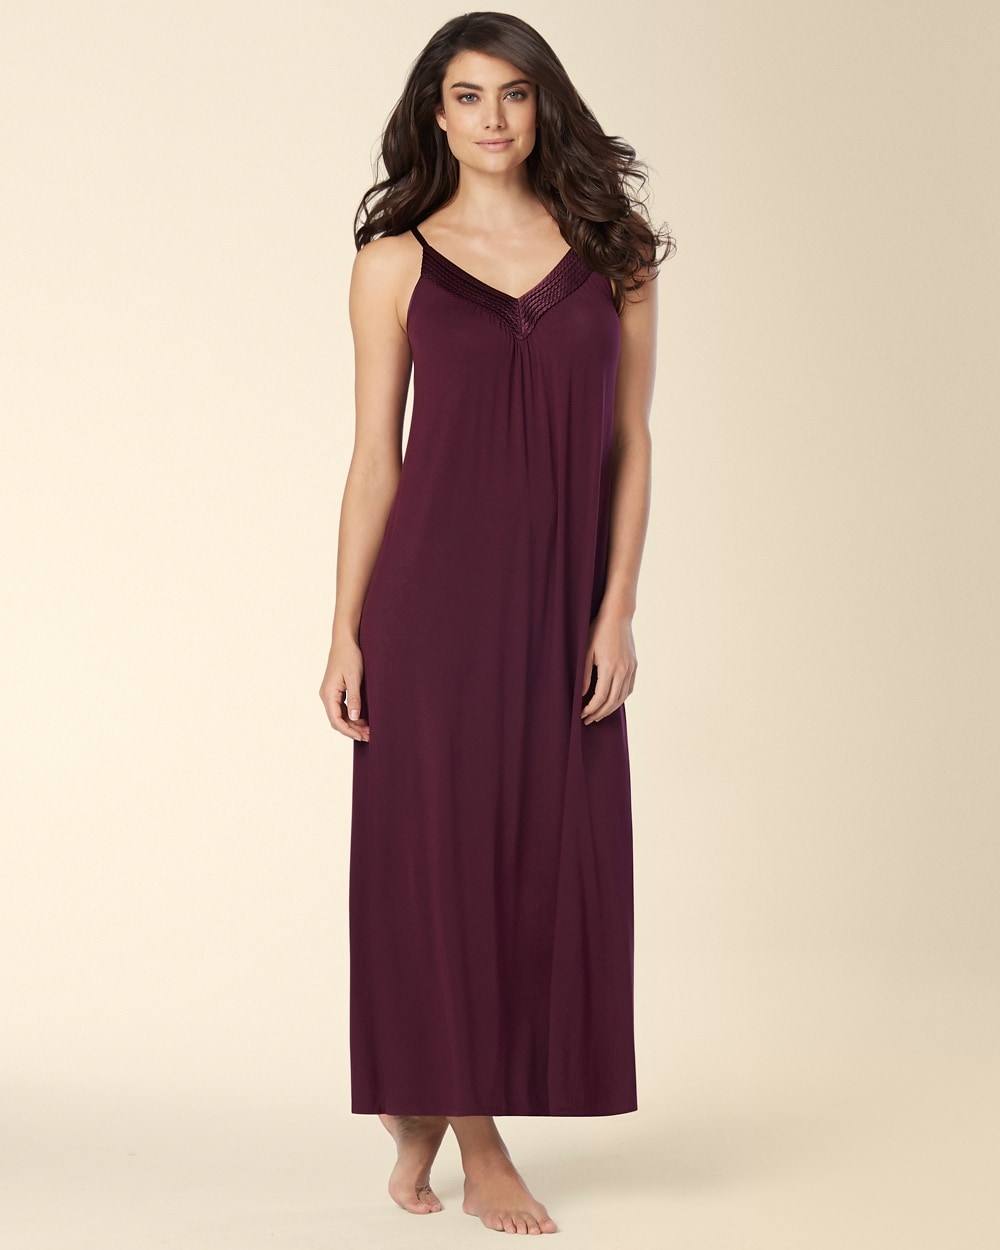 Midnight By Carole Hochman Looking for Love Nightgown Plum - Soma